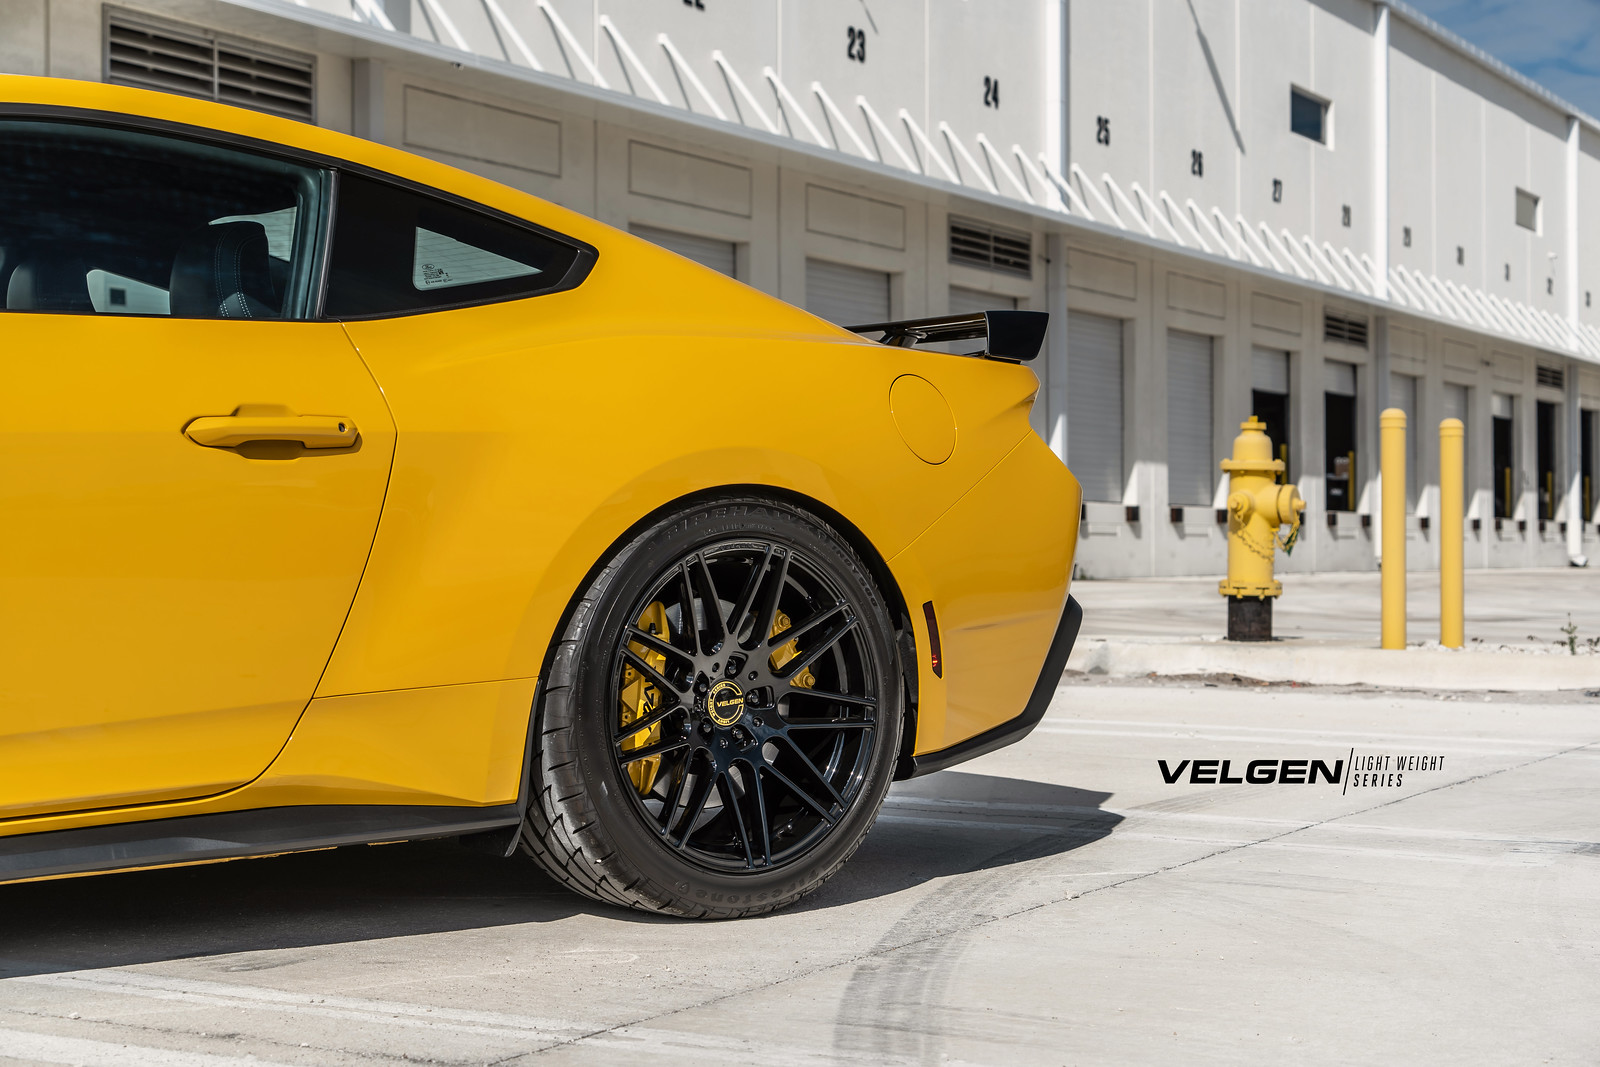 S650 Mustang Warning about HRE wheels and how they fit S650 Velgen Light Weight VF9-1